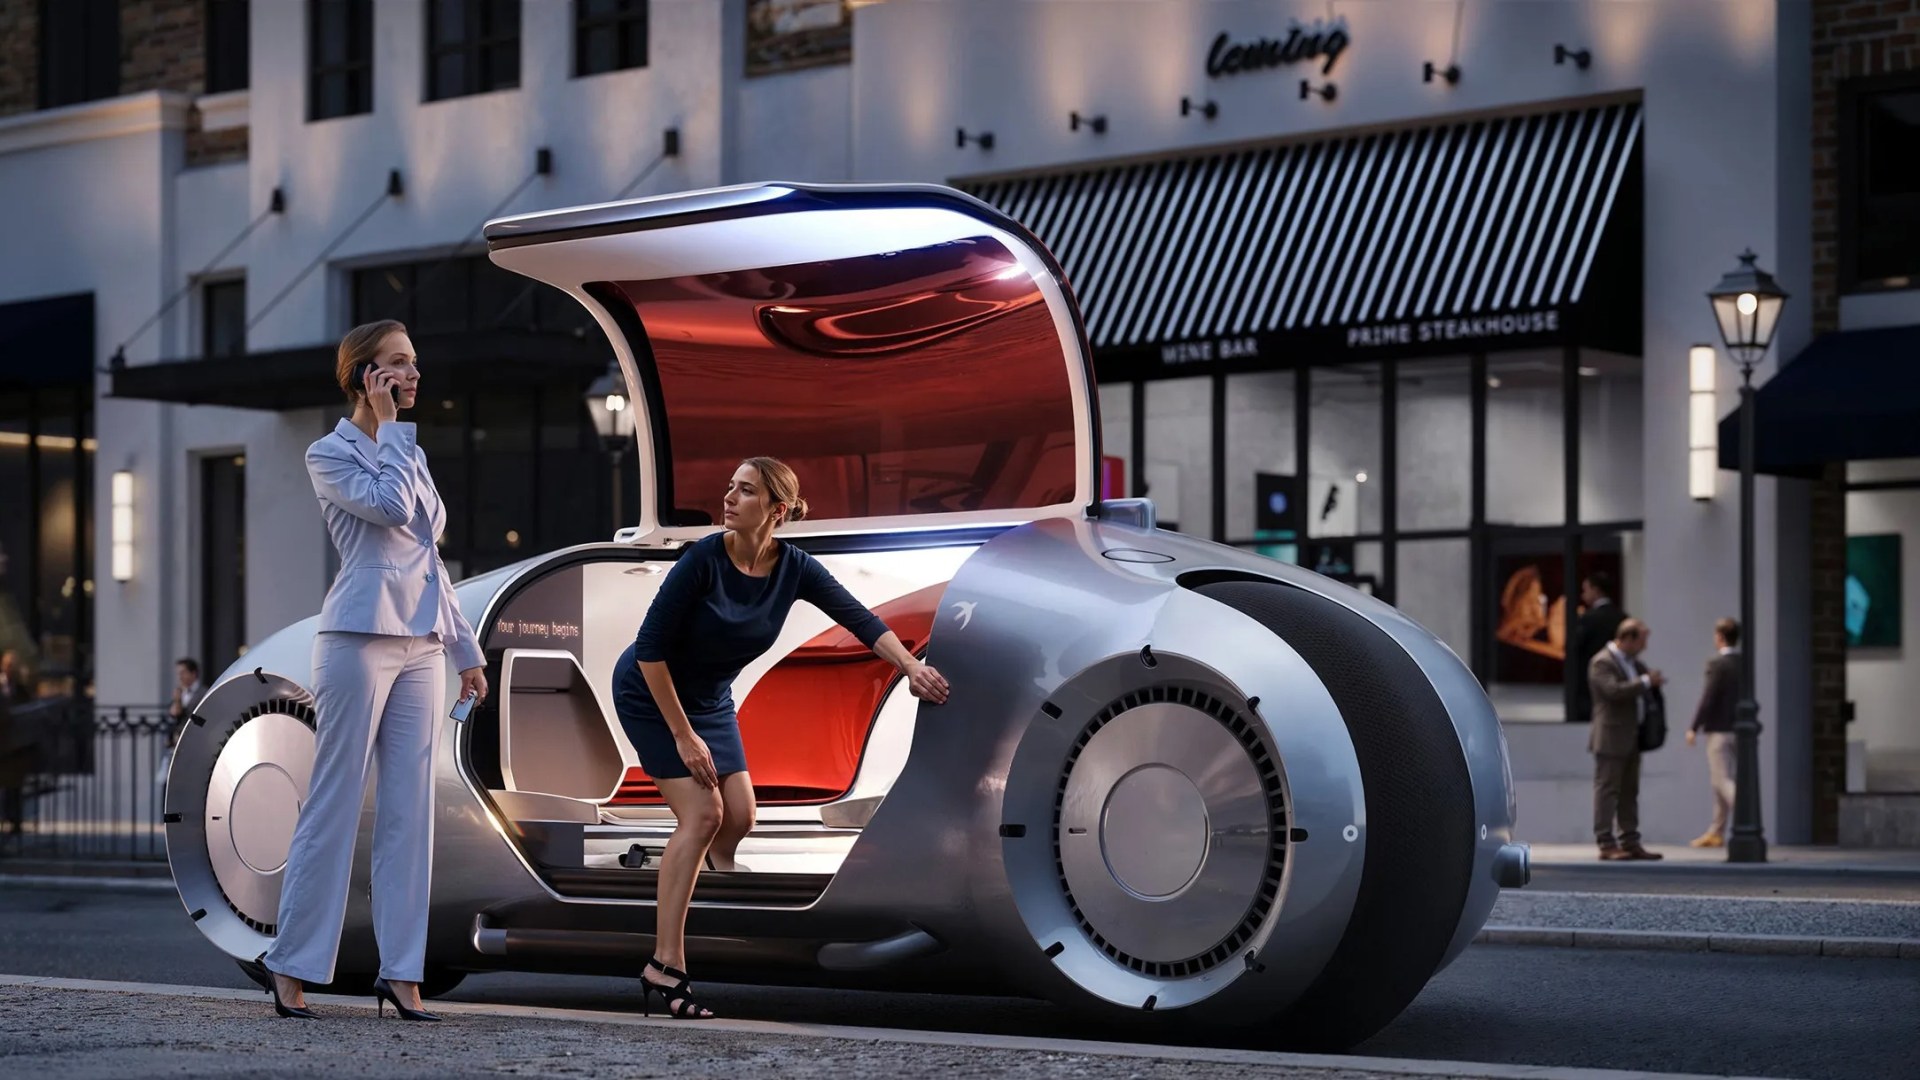 Futuristic triangle-shaped ‘Swift Pod’ car is a rolling hotel room allowing drivers to SLEEP while zooming on motorway